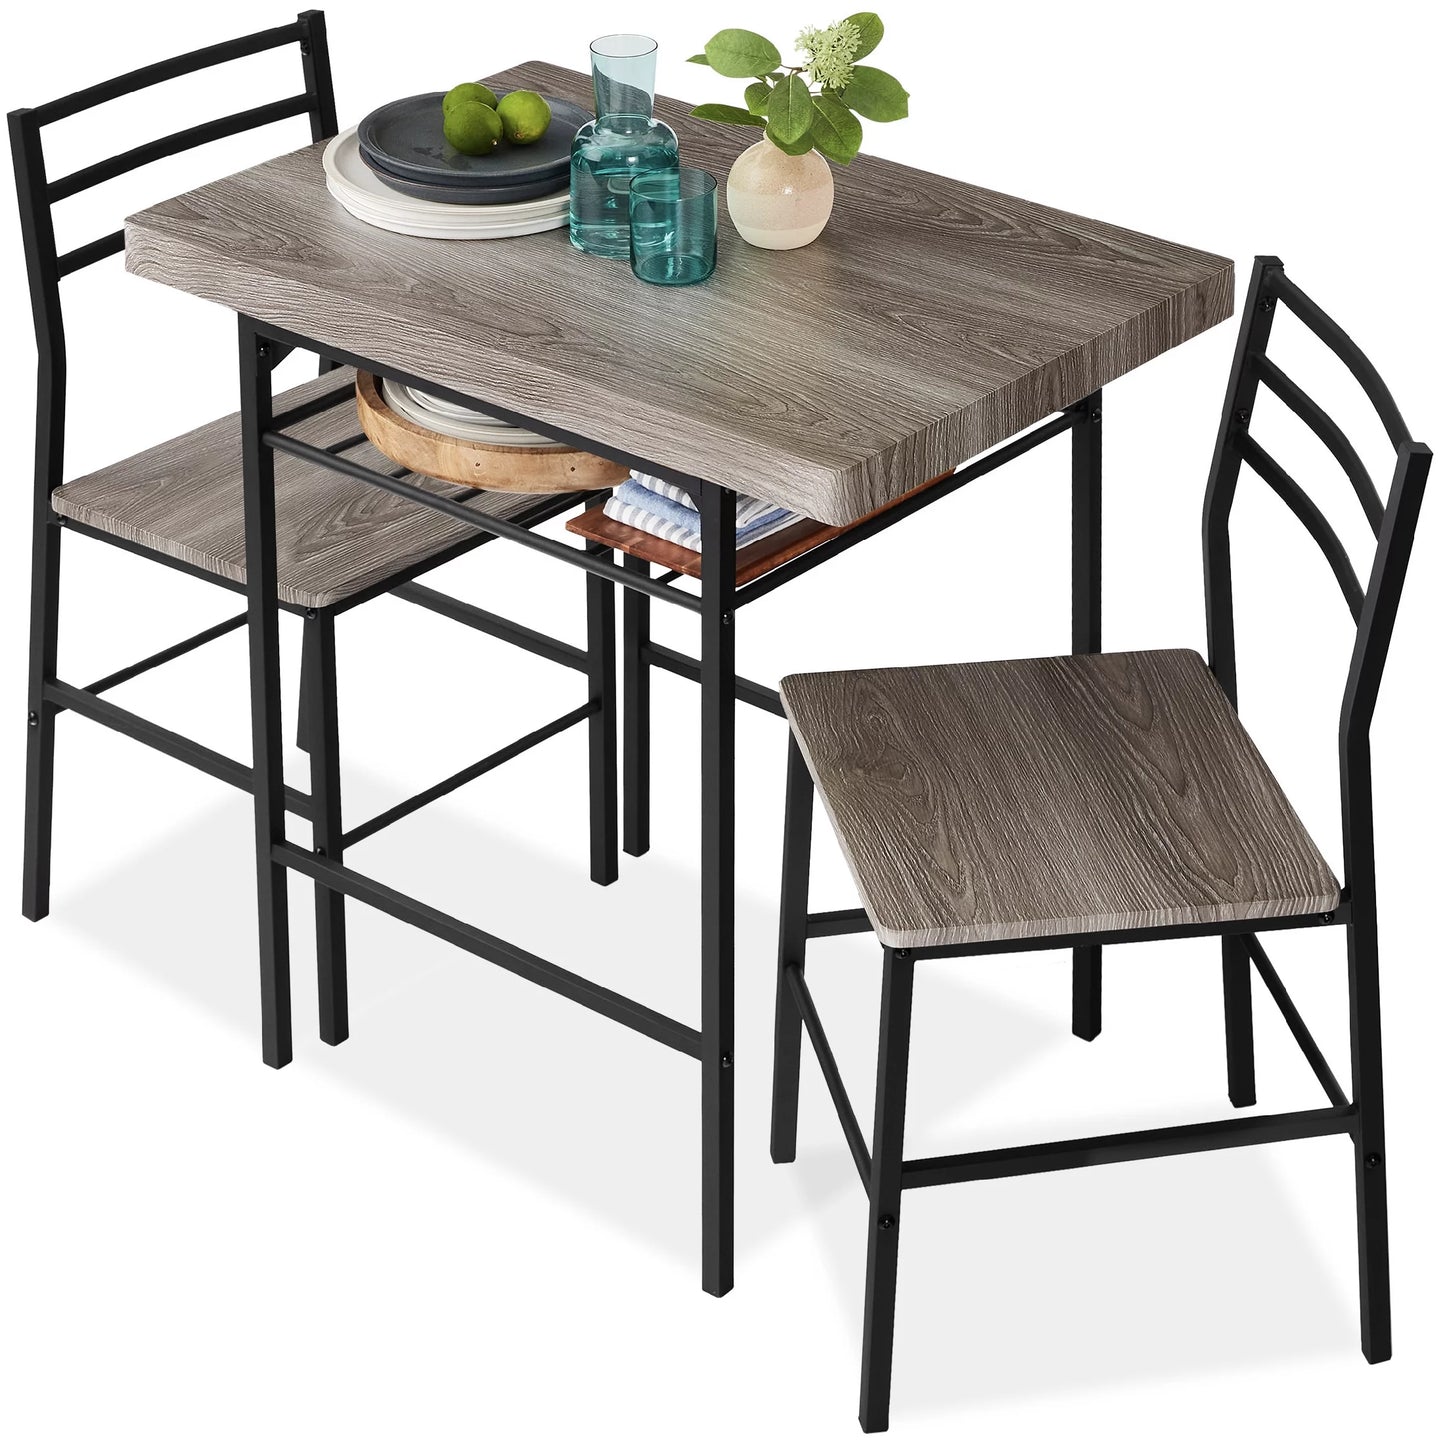 Best Choice Products 3-Piece Modern Dining Set, Square Table & Chairs Set w/ Steel Frame, Built-In Storage Rack - Brown